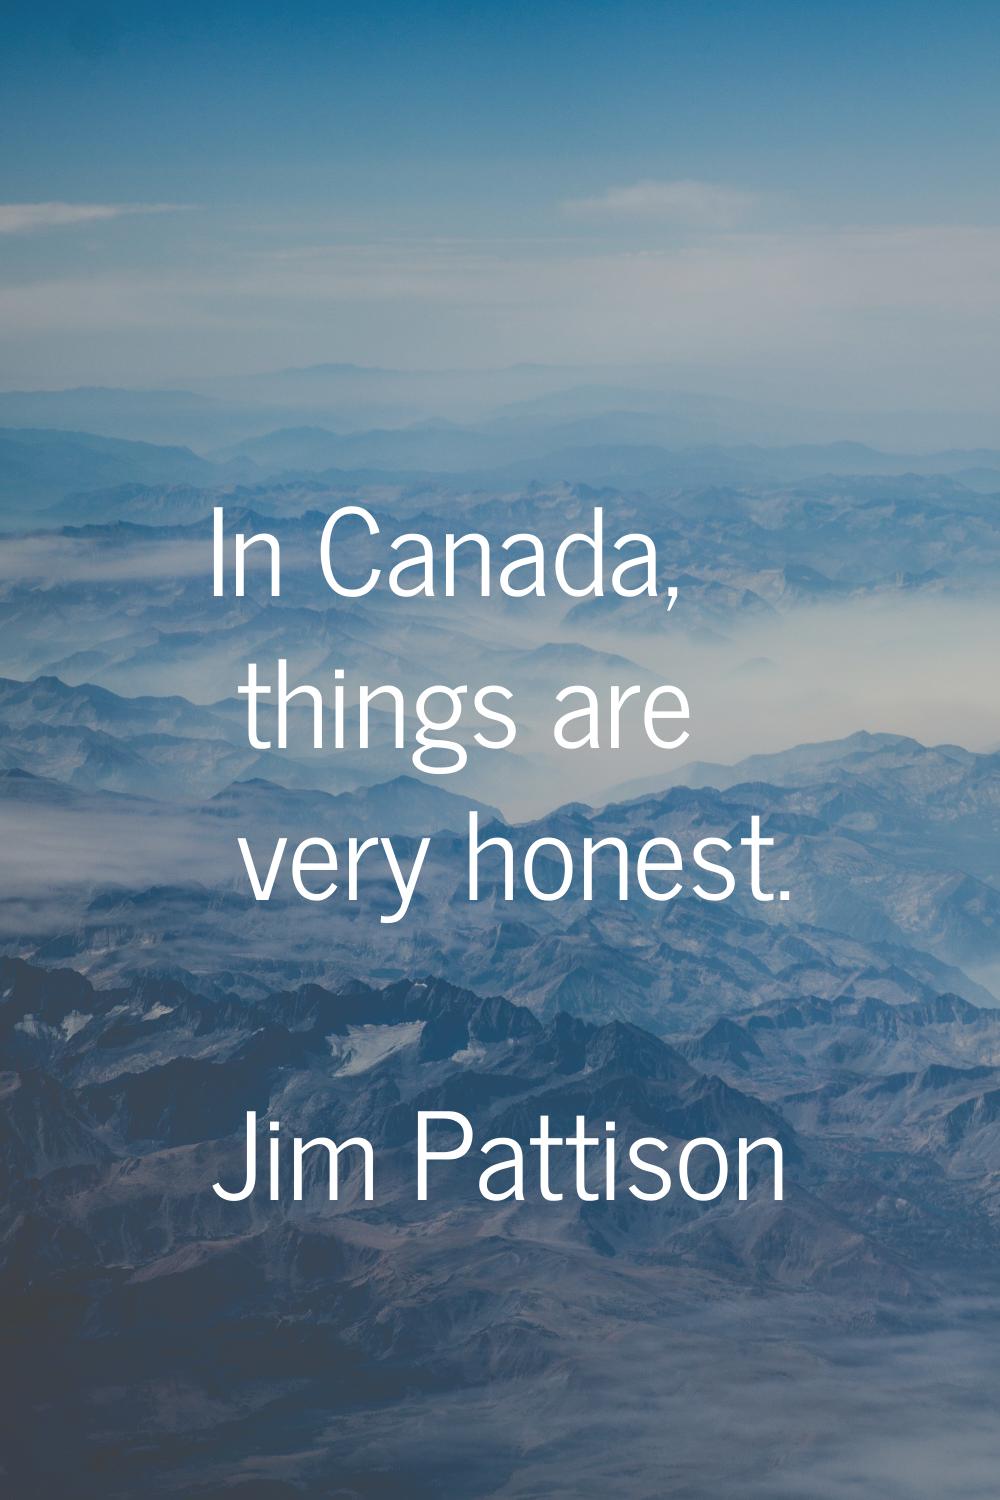 In Canada, things are very honest.